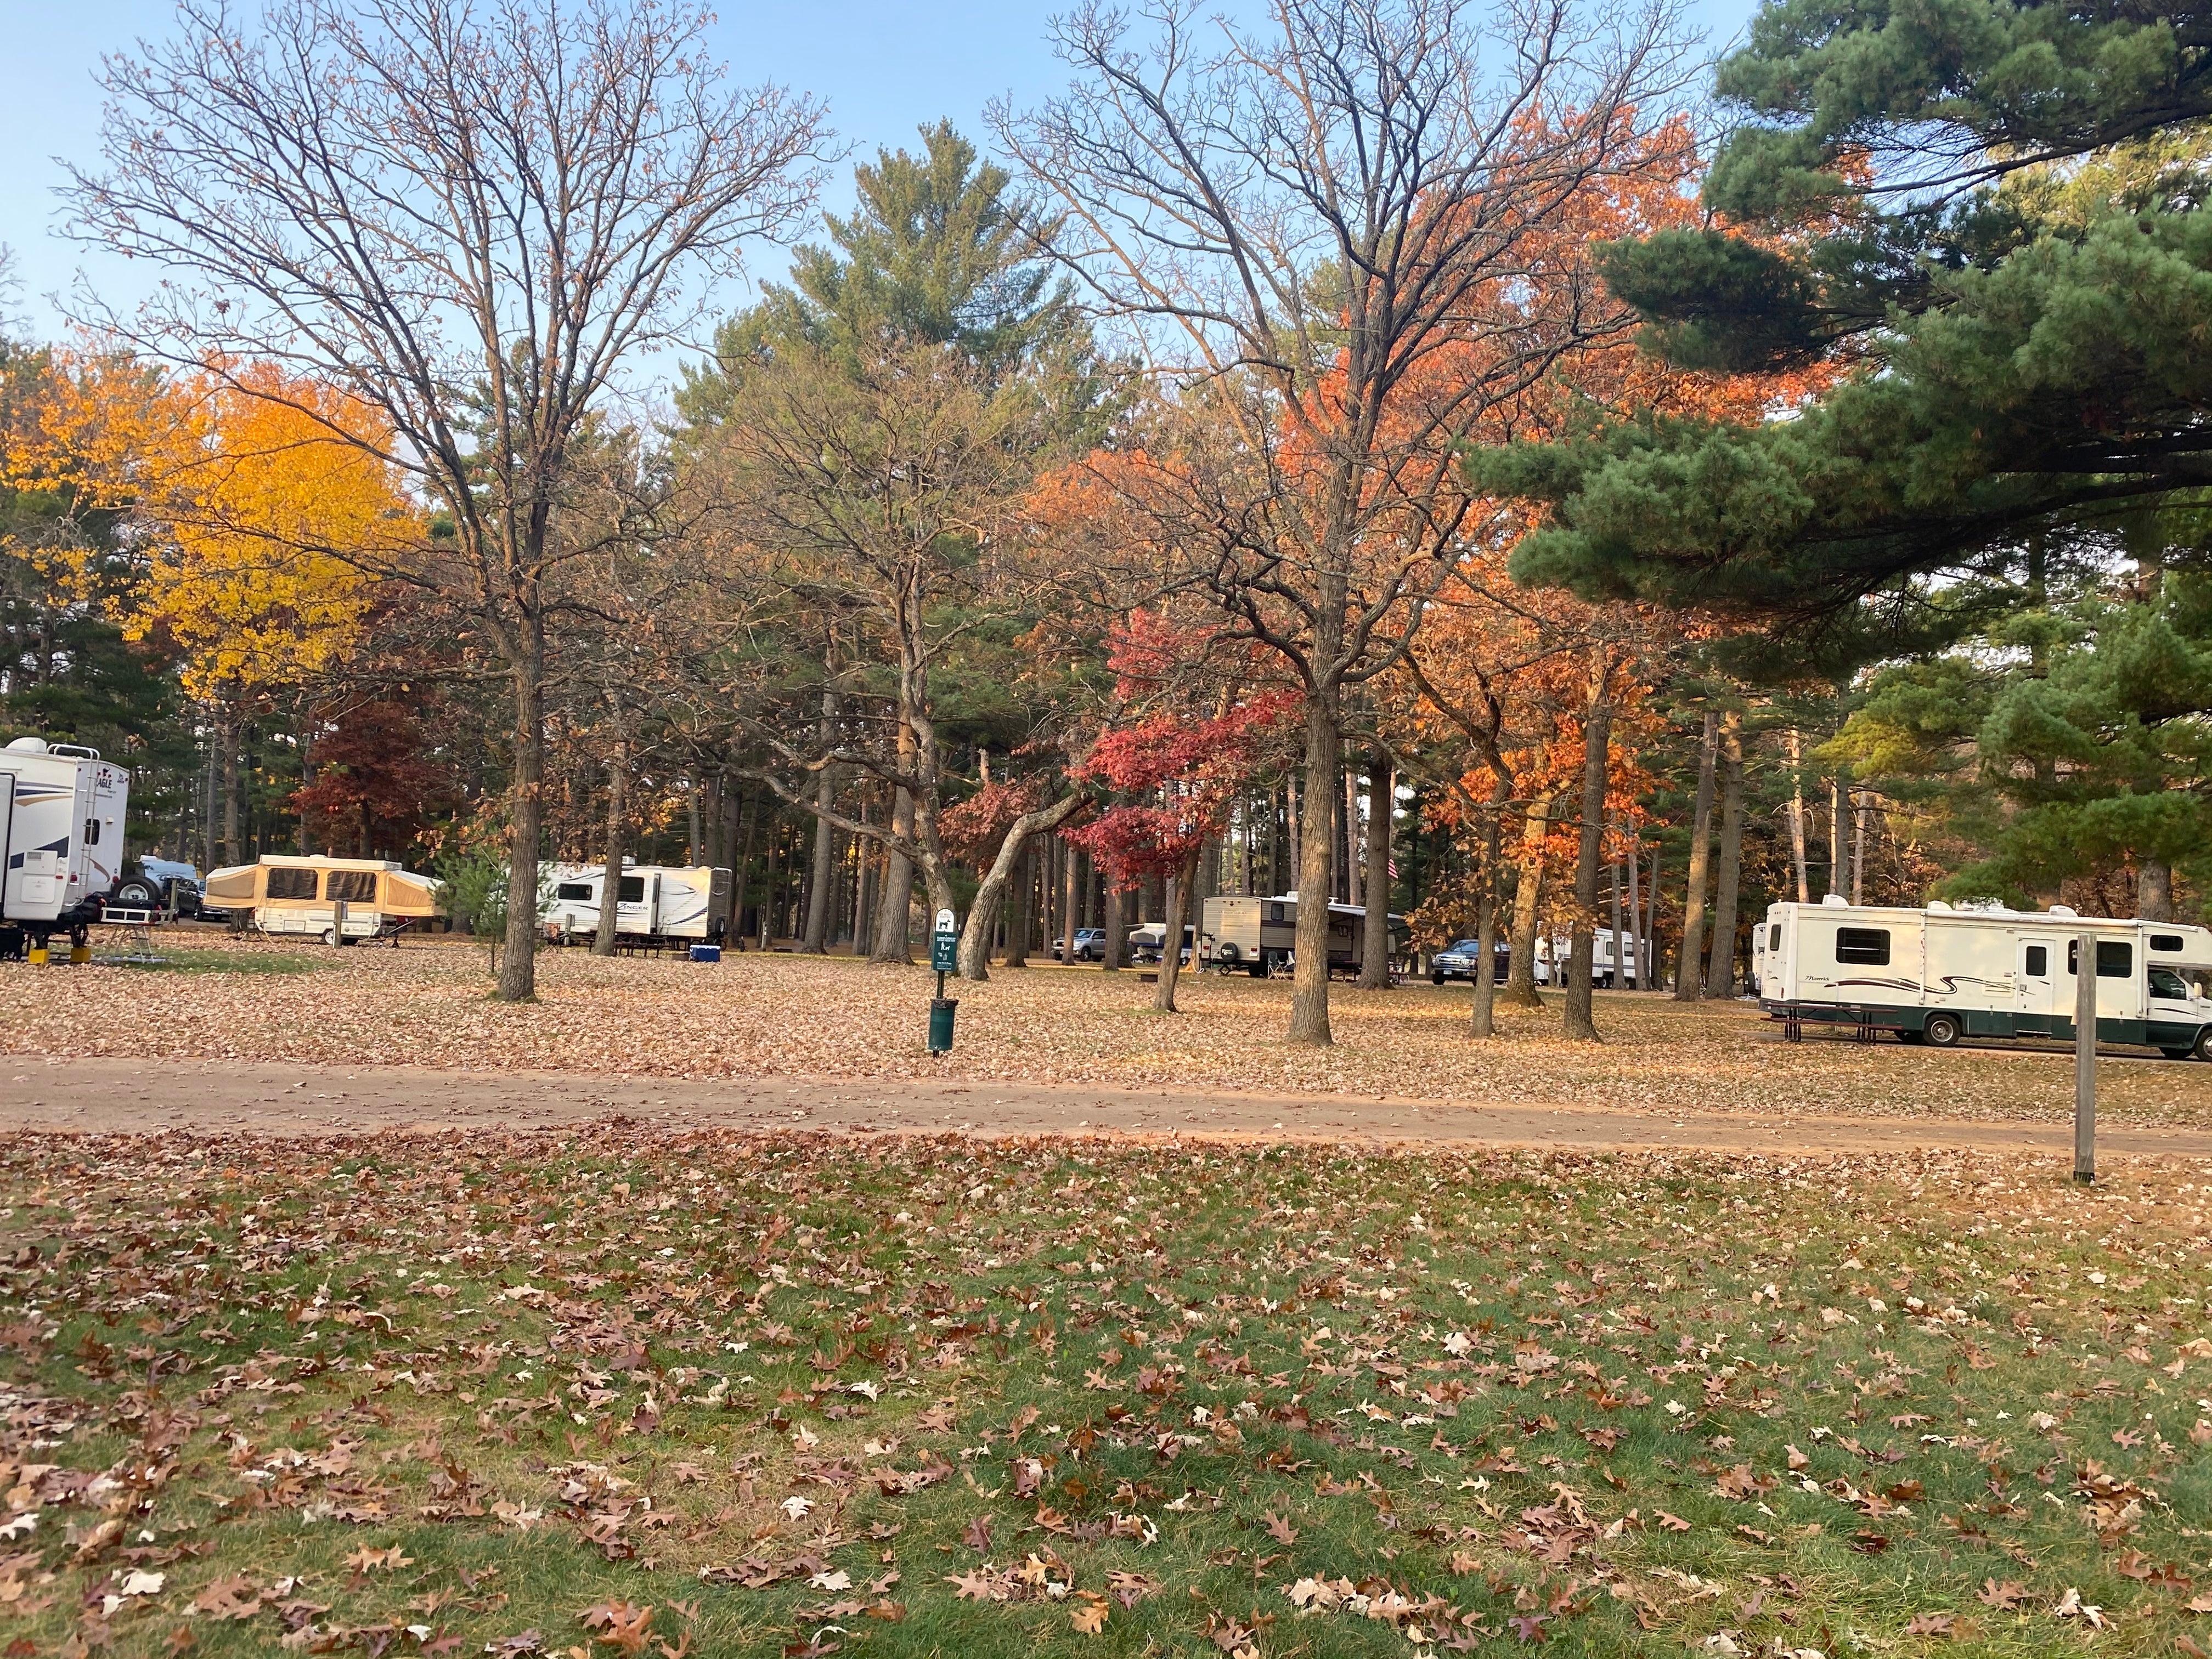 Camper submitted image from Military Park Camp Ripley DeParcq Woods Campground - 2